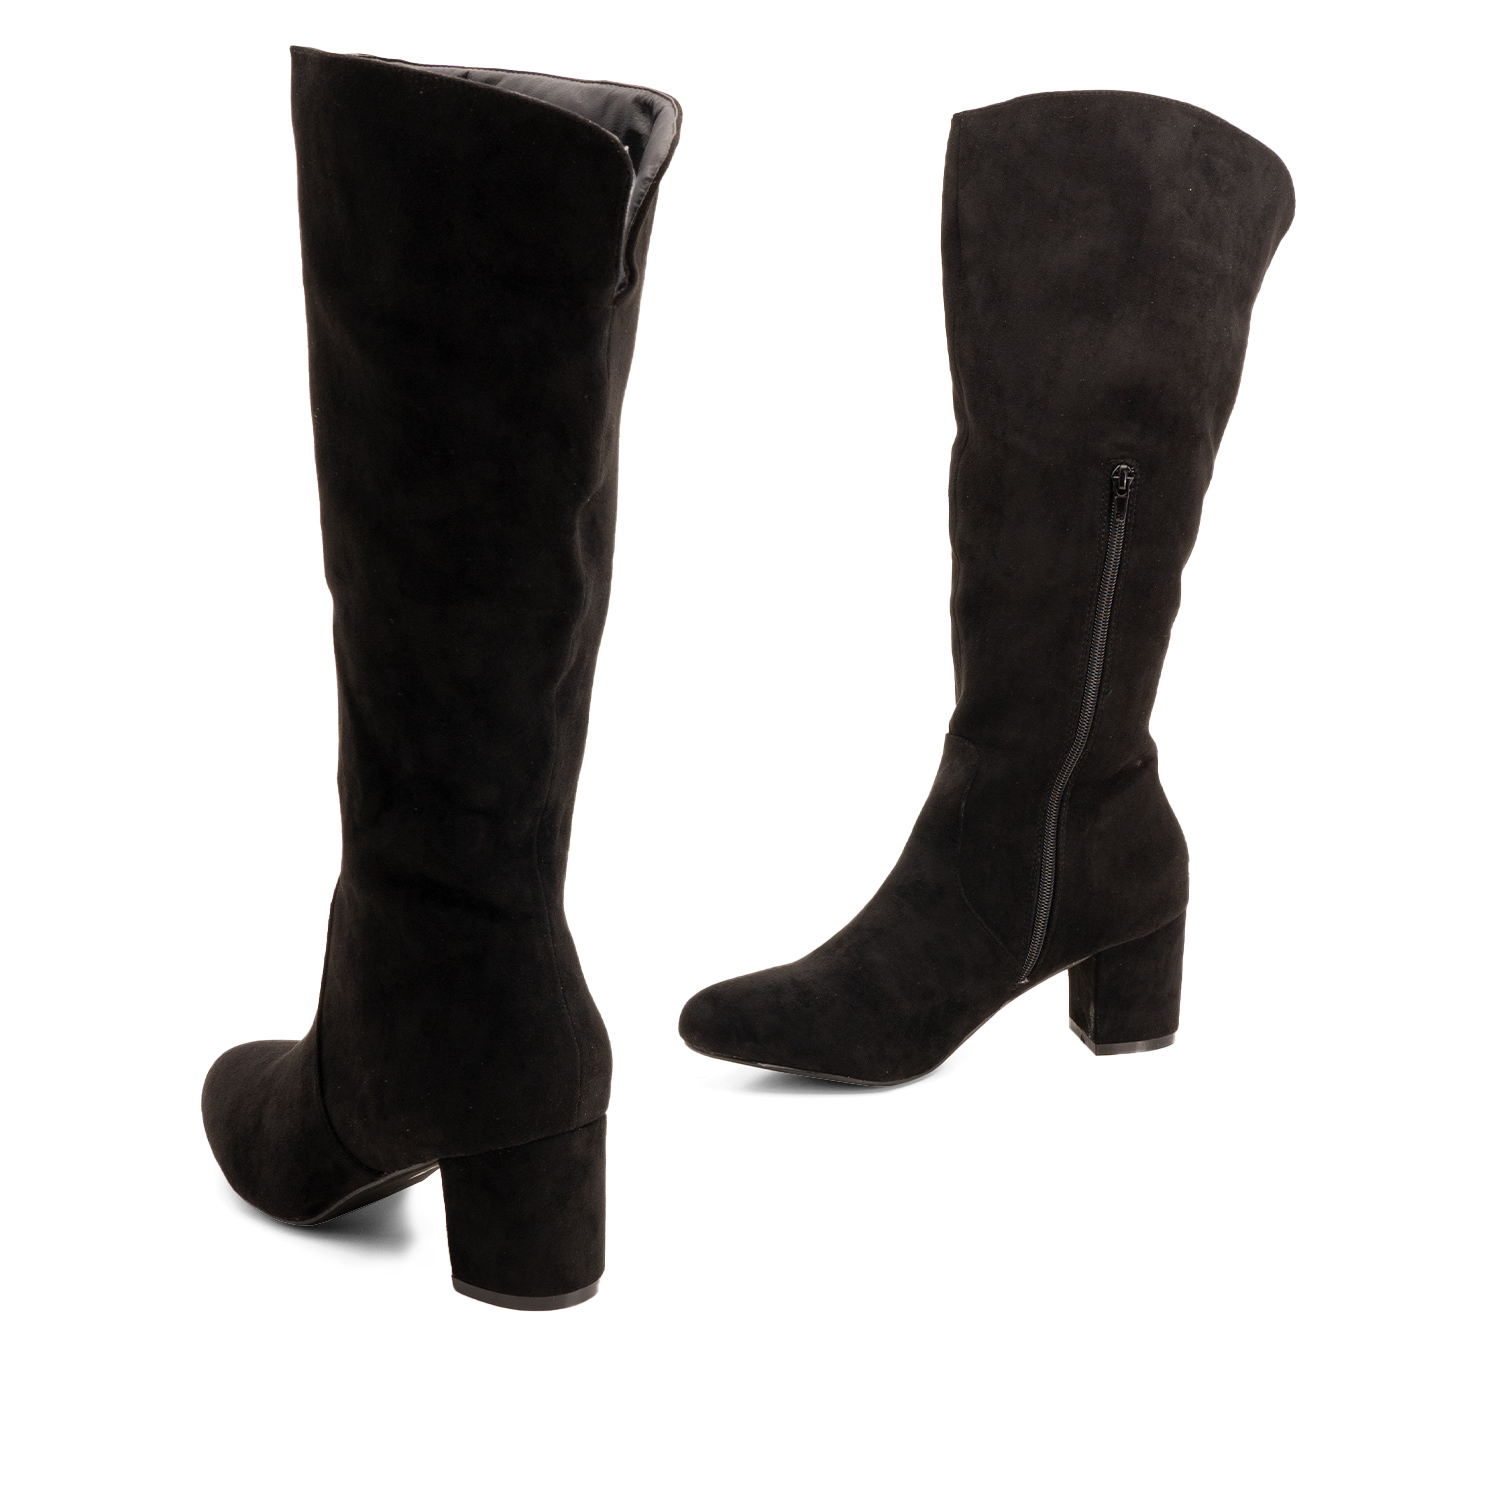 Heeled mid-calf boots in black faux suede 